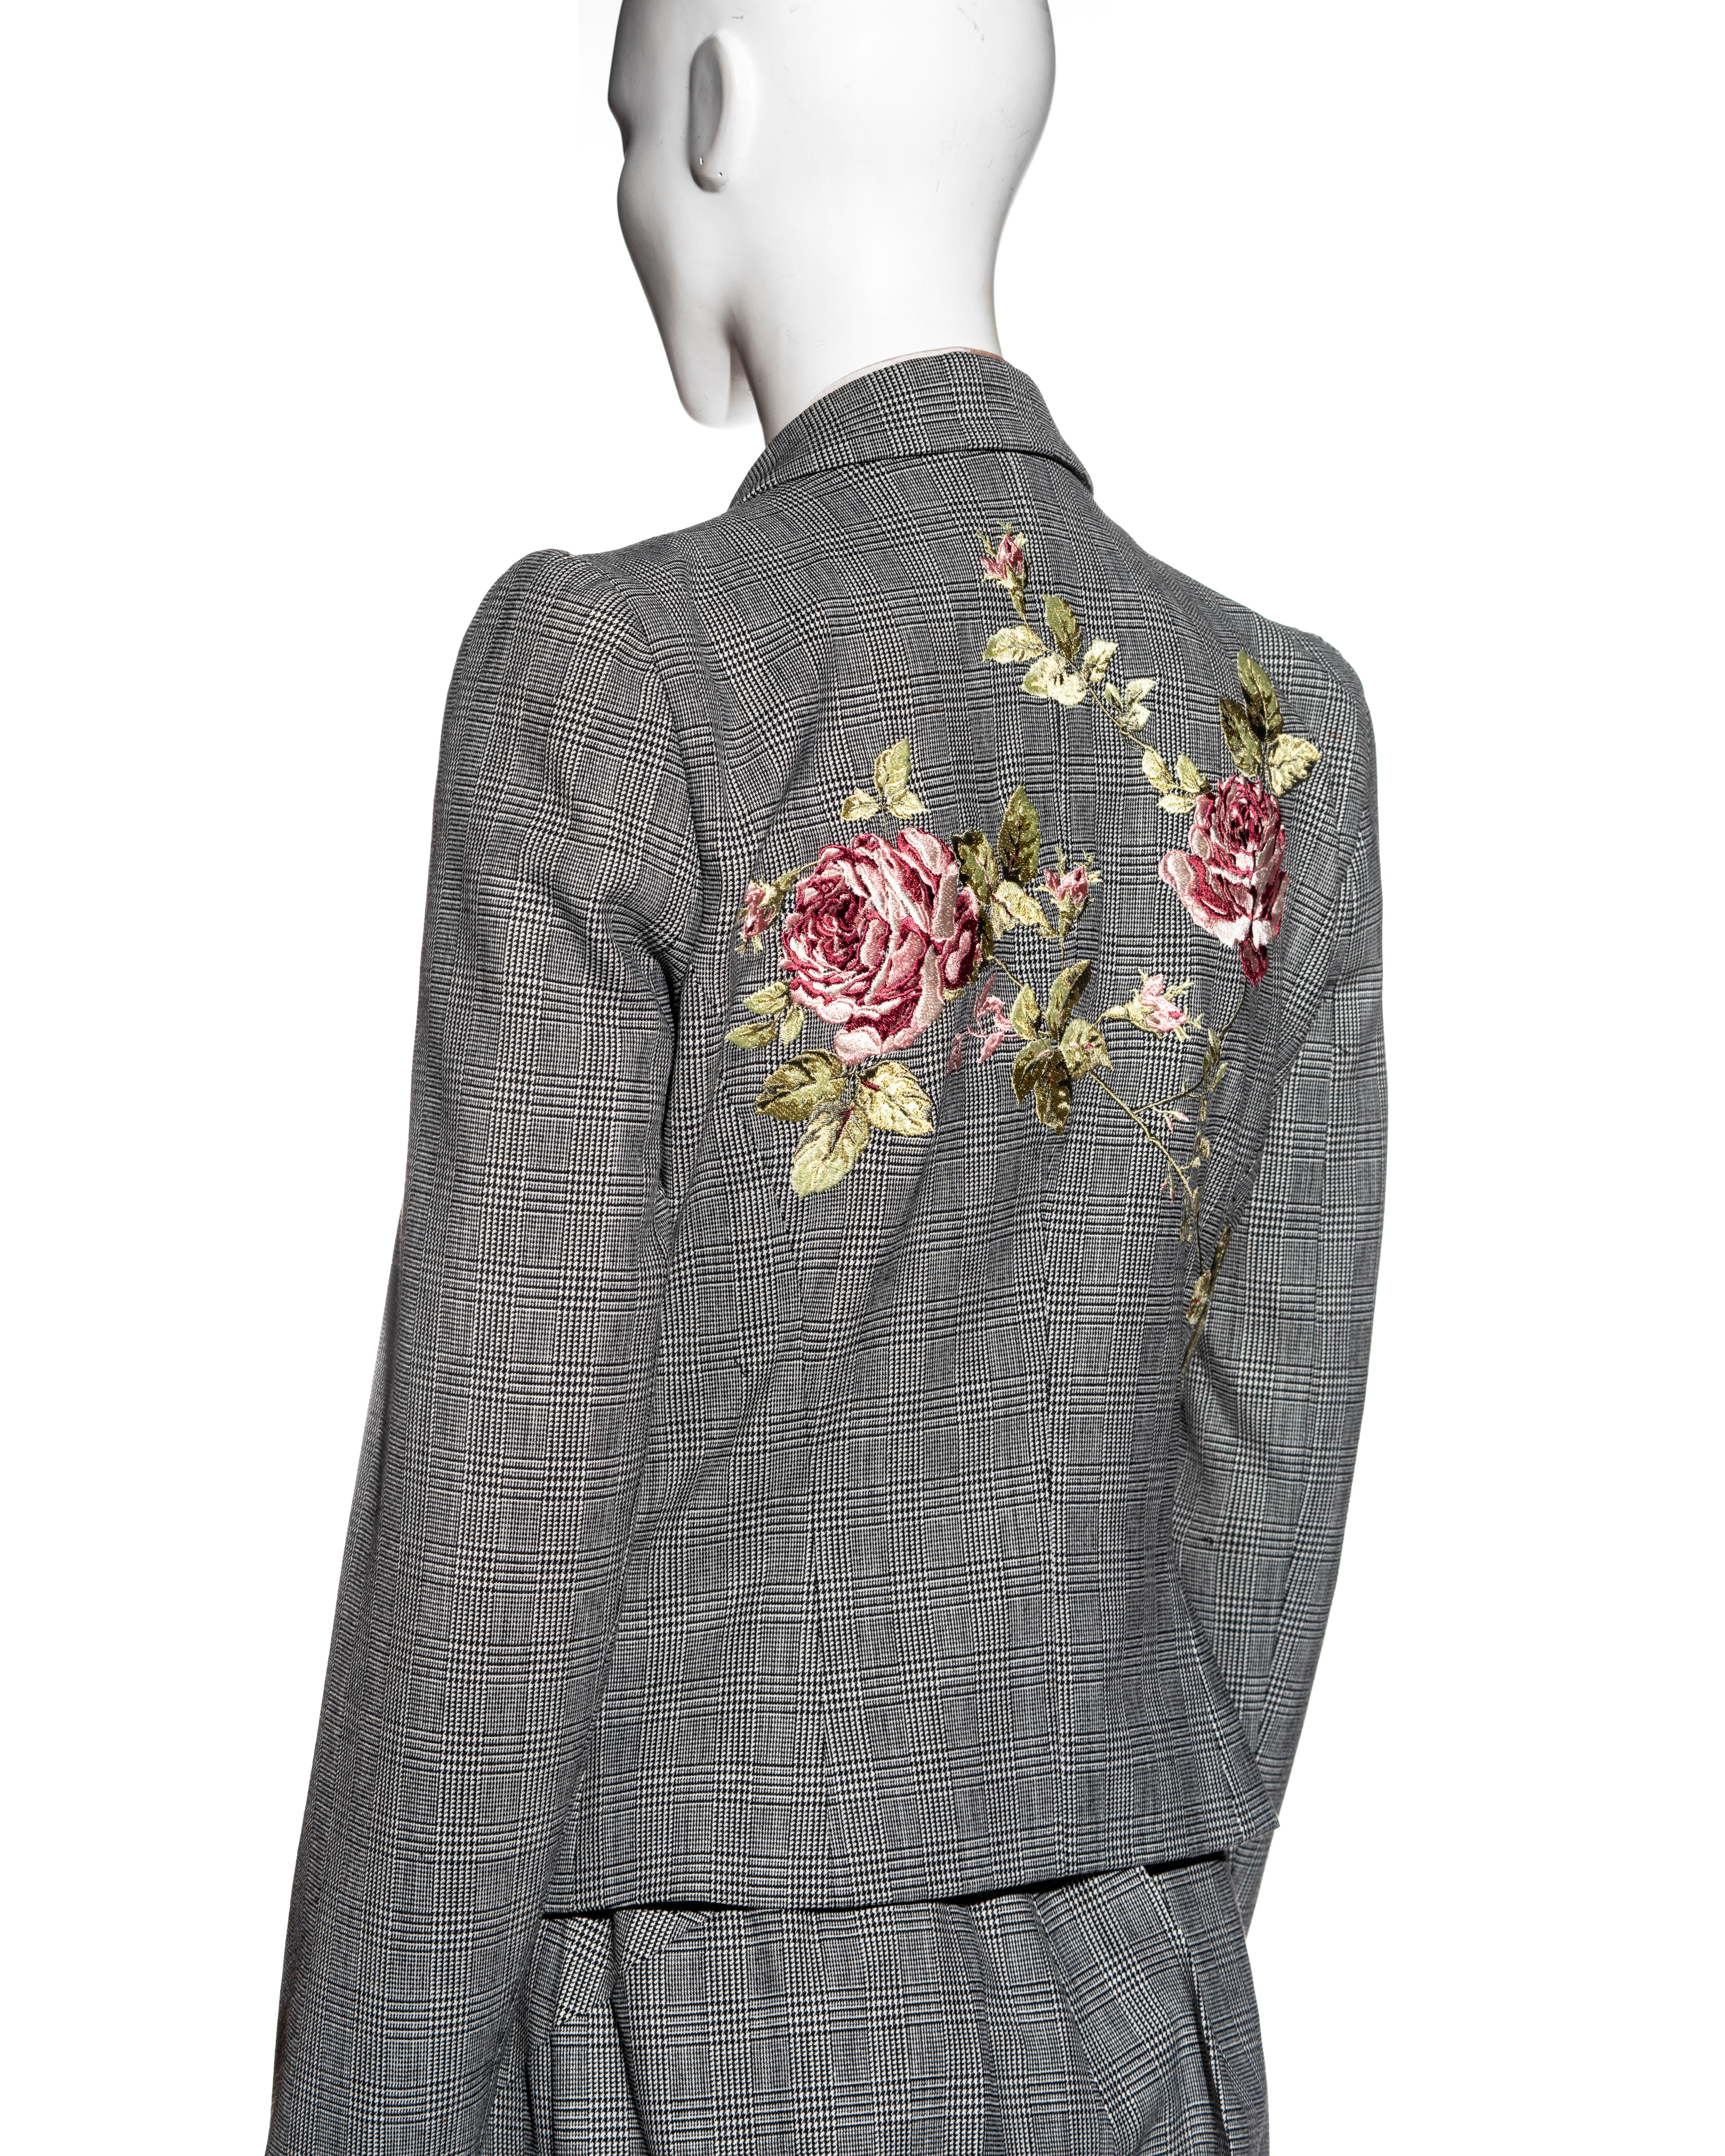 Alexander McQueen Prince of Wales checked suit with rose embroidery, fw 1997 For Sale 1